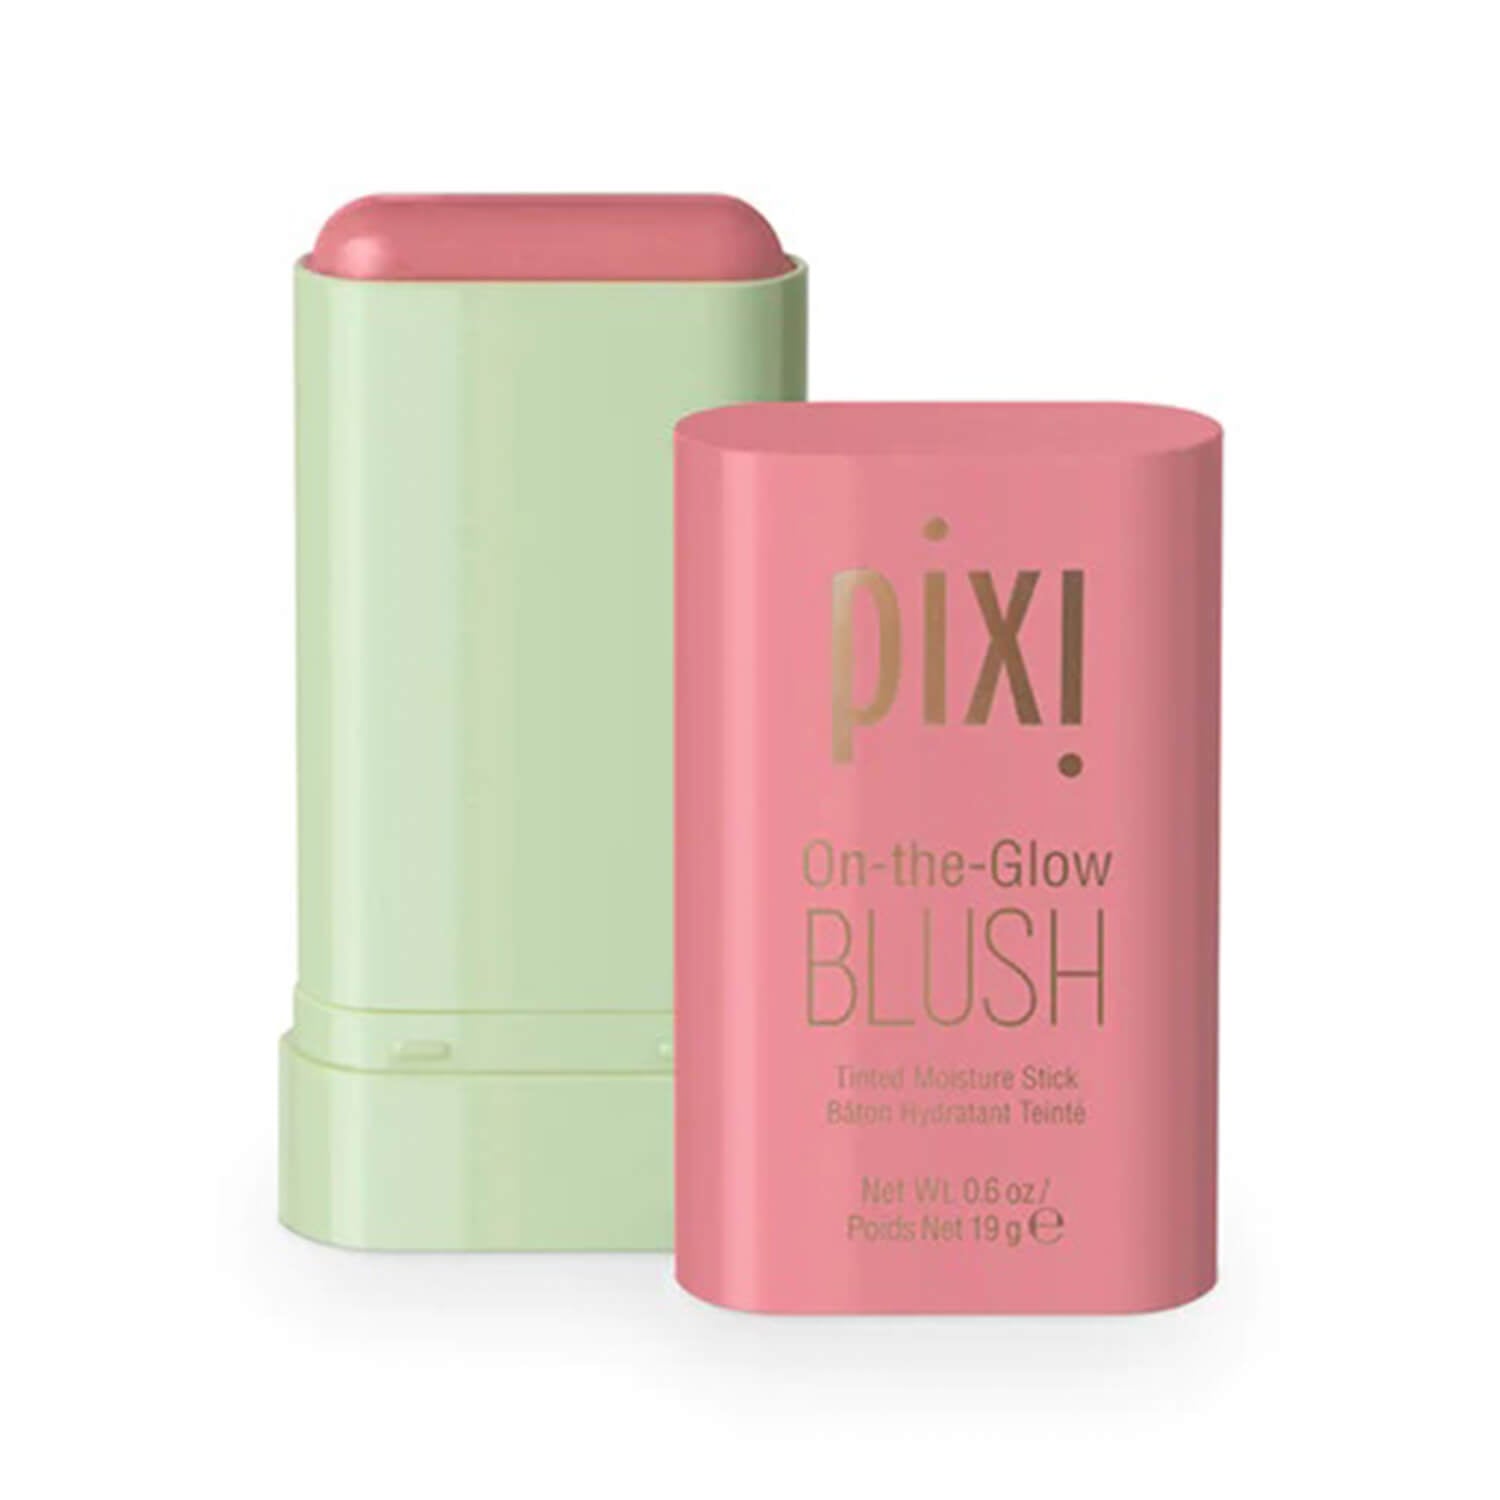 Shop Pixi On-the-Glow Blush in Fleur shade available at Heygirl.pk for delivery in Pakistan. 